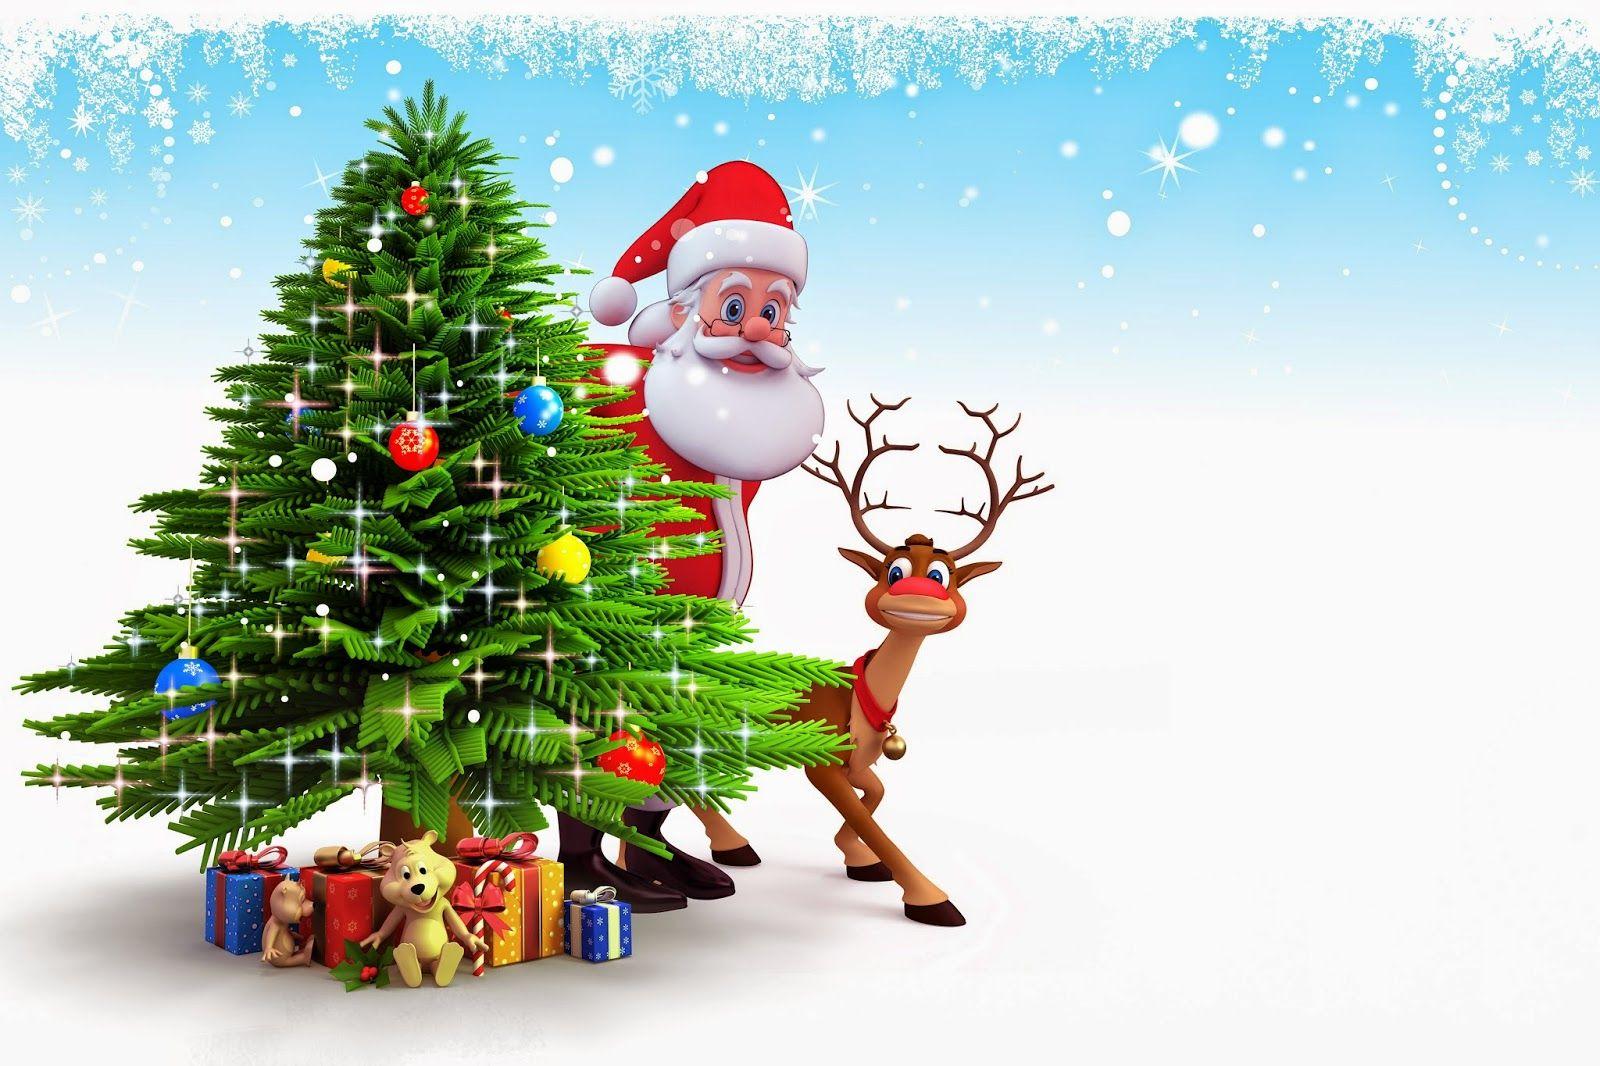 Christmas cartoon animation children image picture for kids facebook